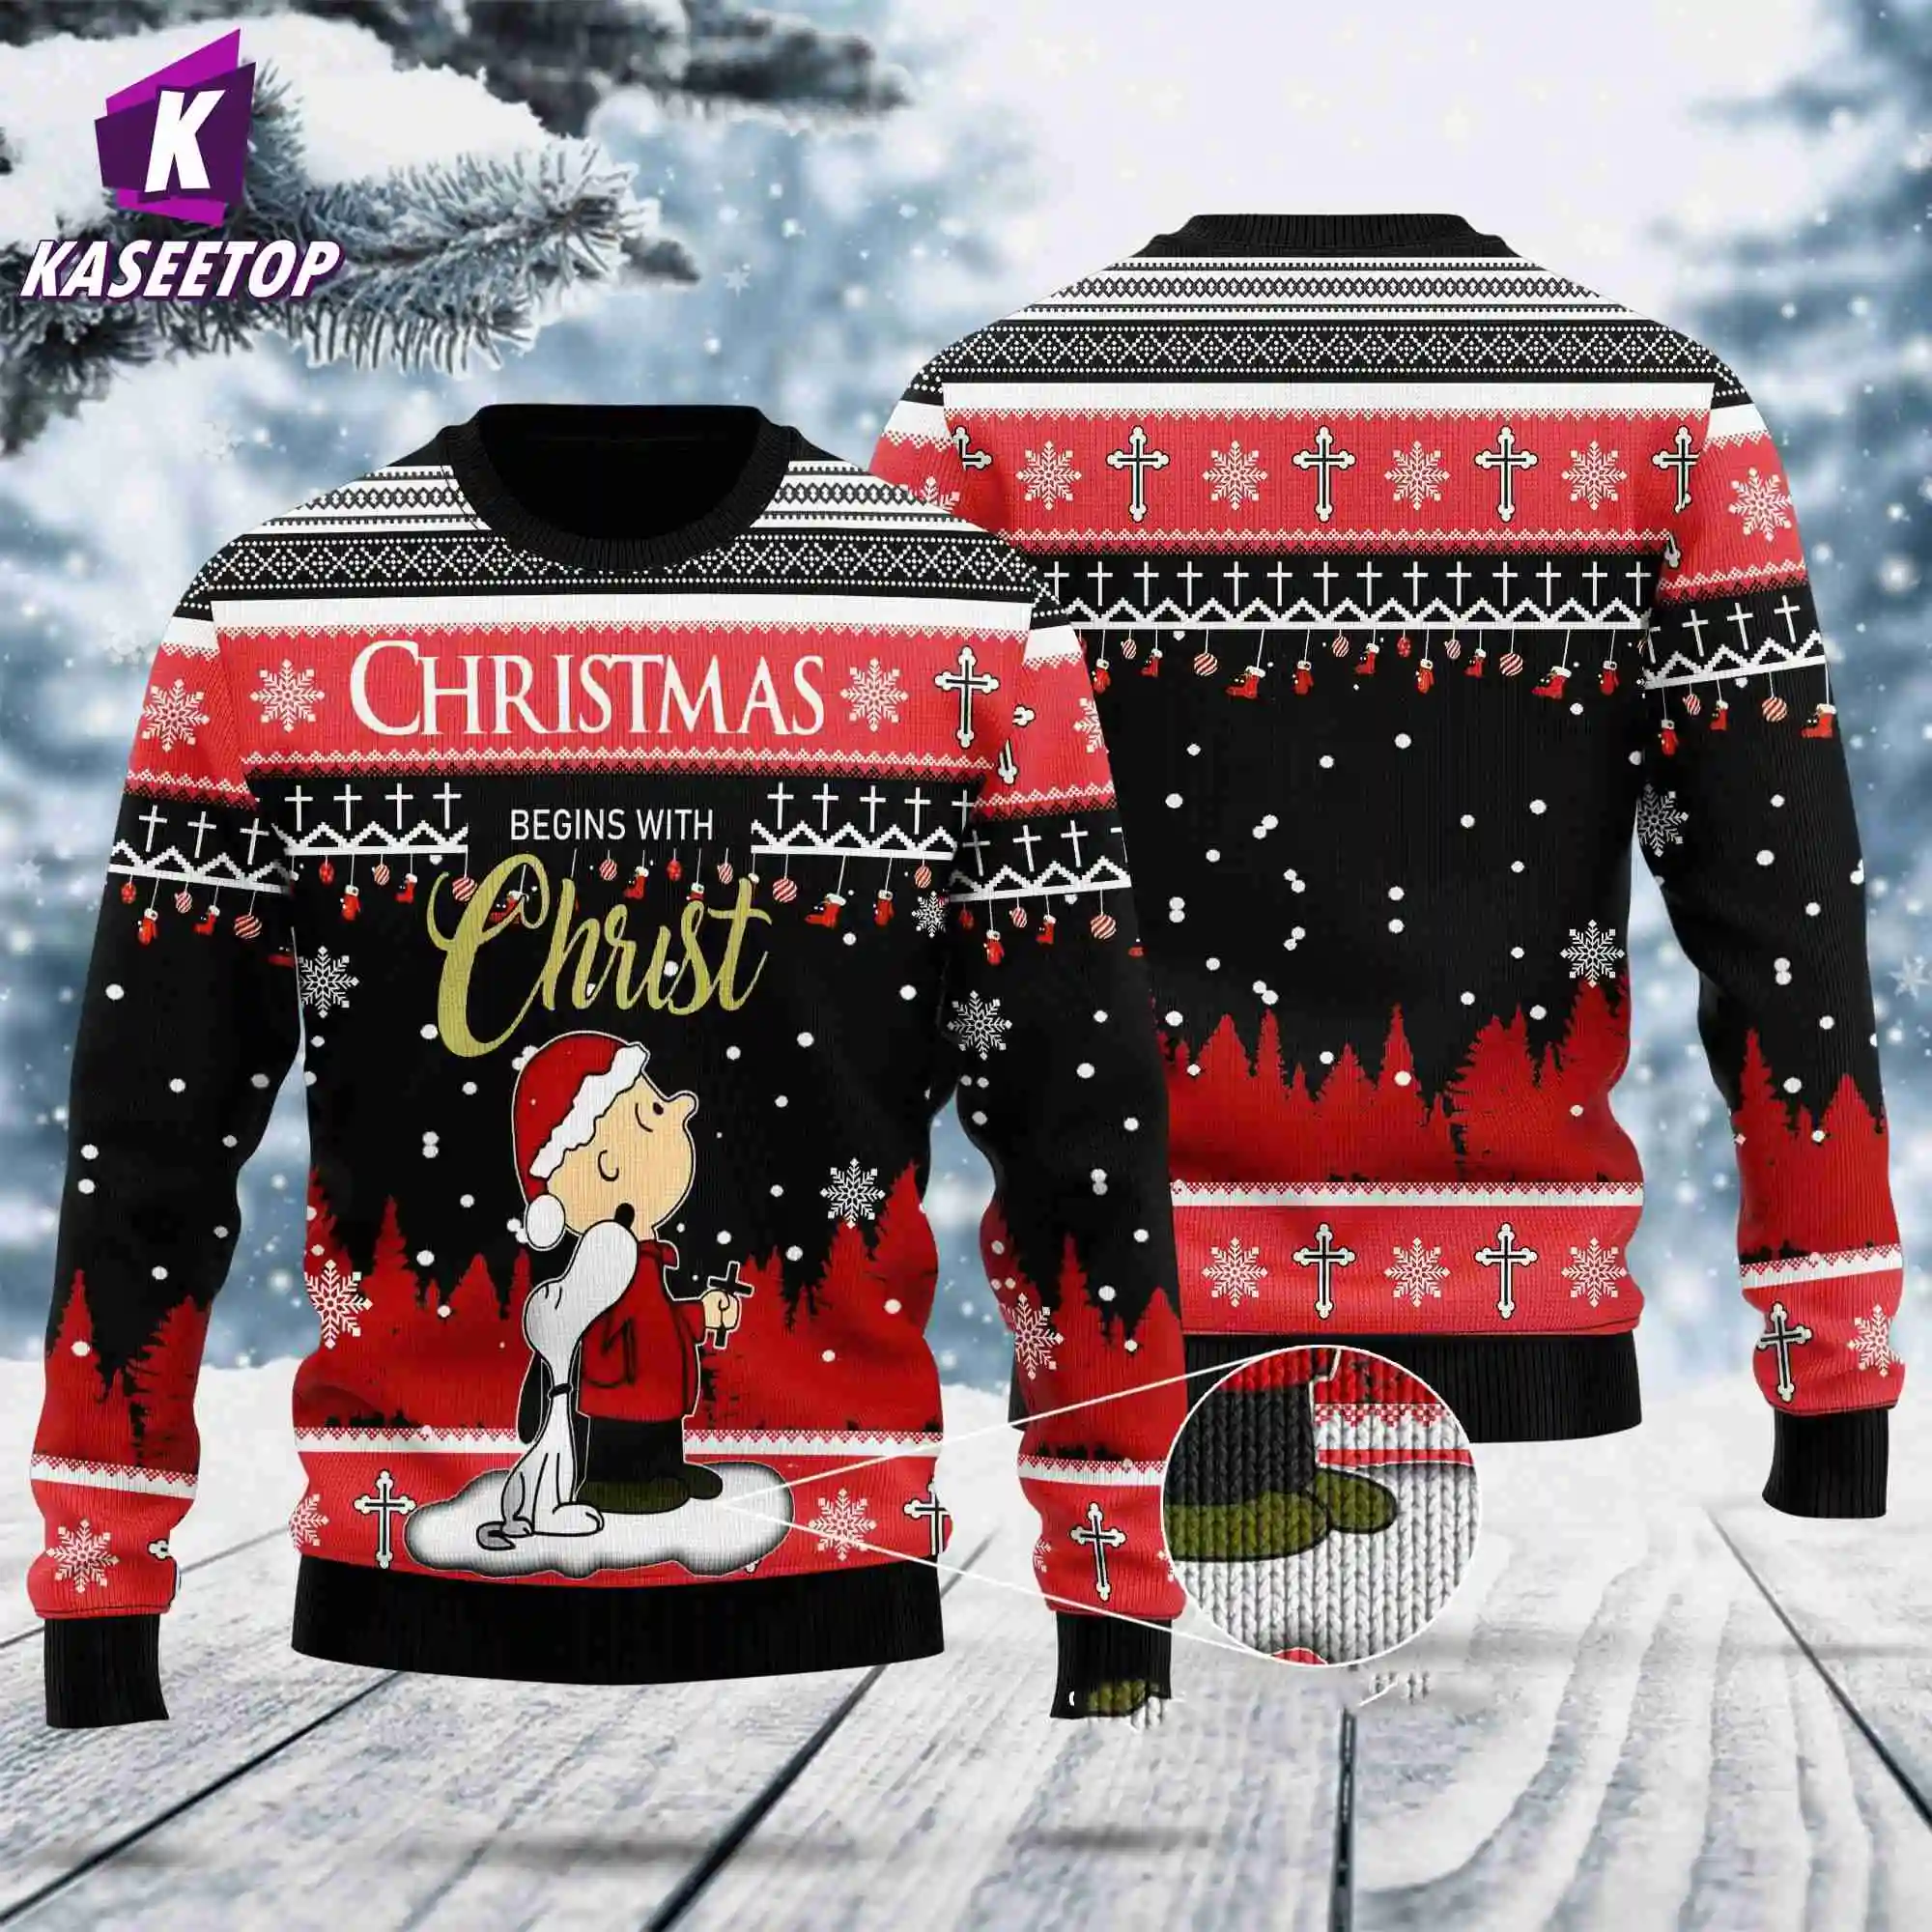 

Unisex Ugly Sweater Christmas Begins With Christ-s Jumper Tops 3D Print Men's Knitting Crewneck Sweatshirt Casual Long Sleeve